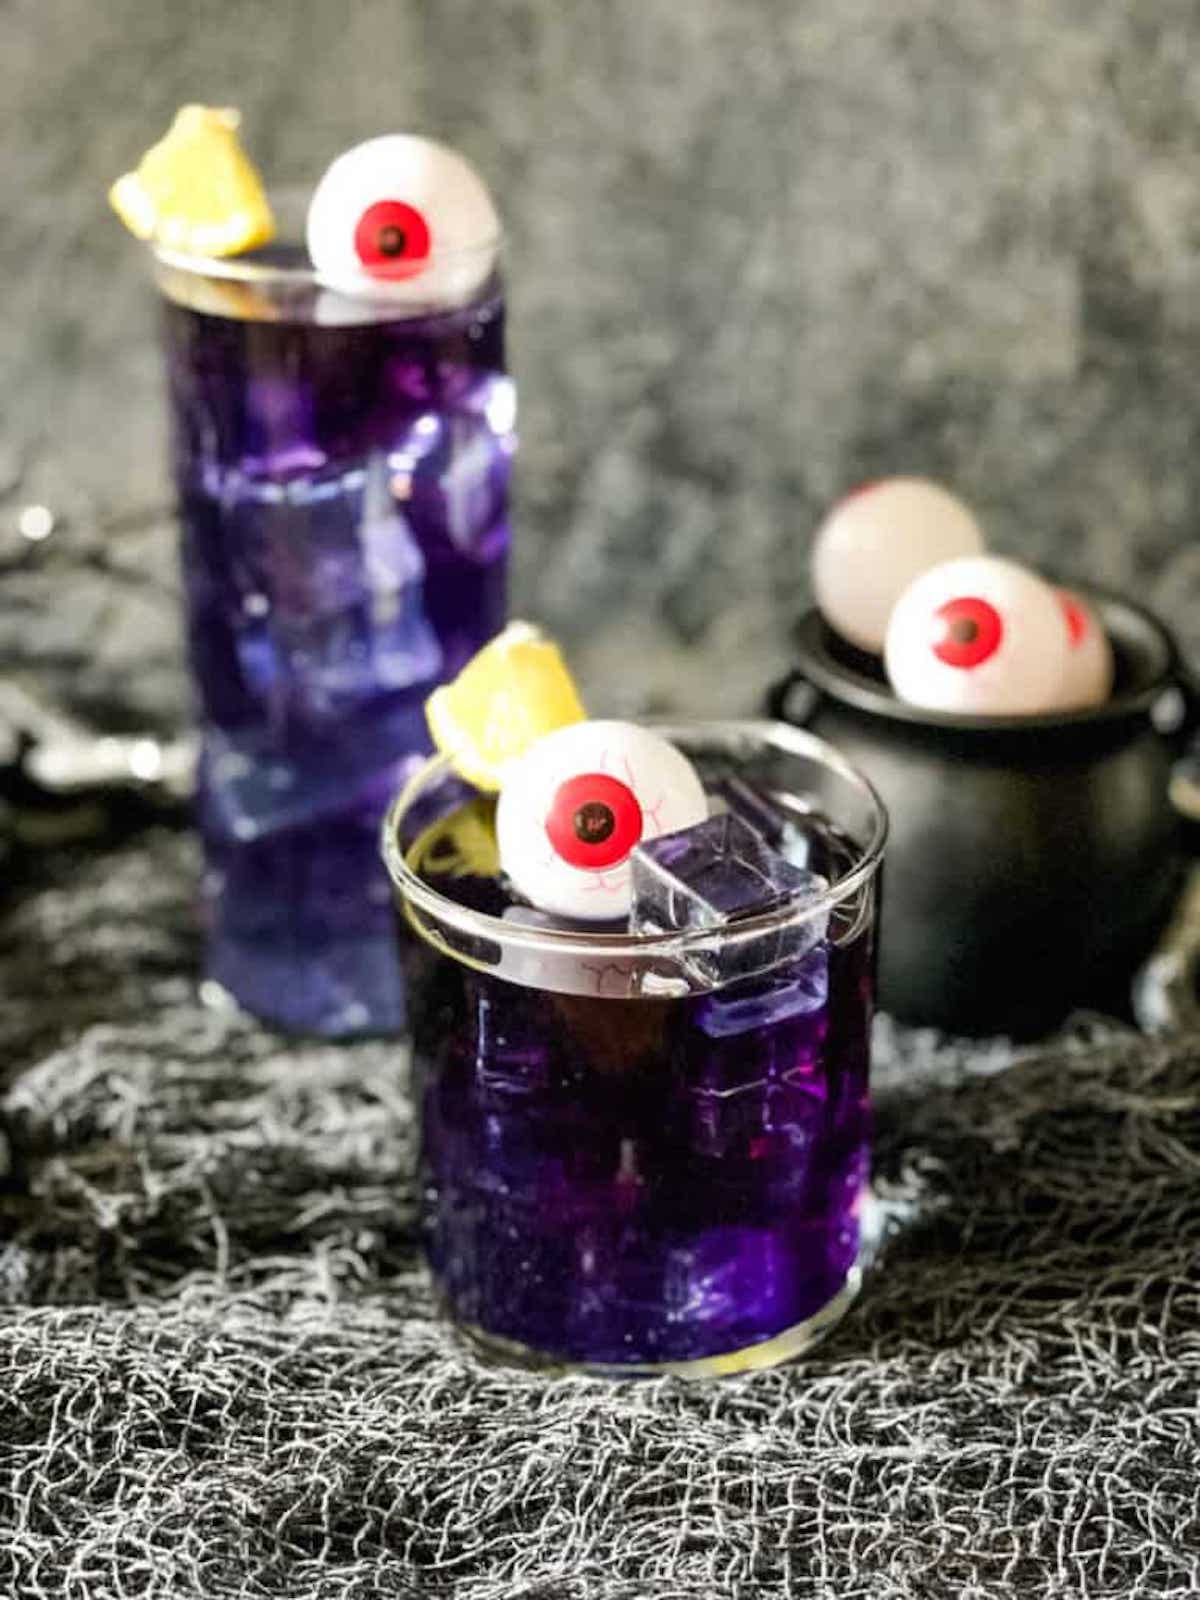 Purple people eater cocktails topped with candy eyes.